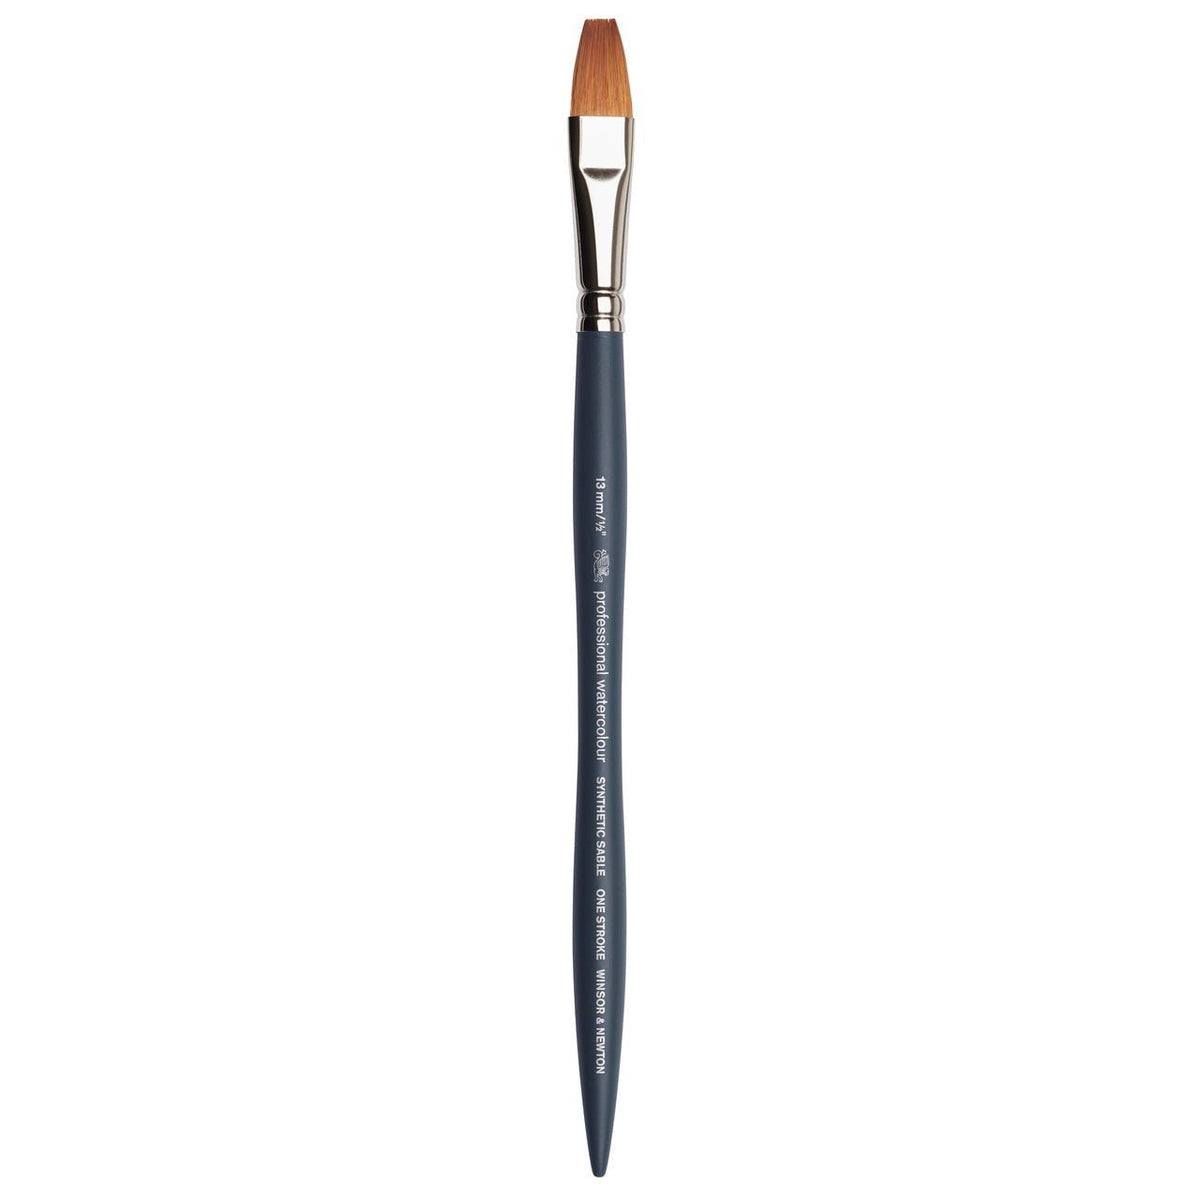 Winsor & Newton Professional Watercolor Synthetic Sable Brush - One Stroke 1/2 inch - merriartist.com